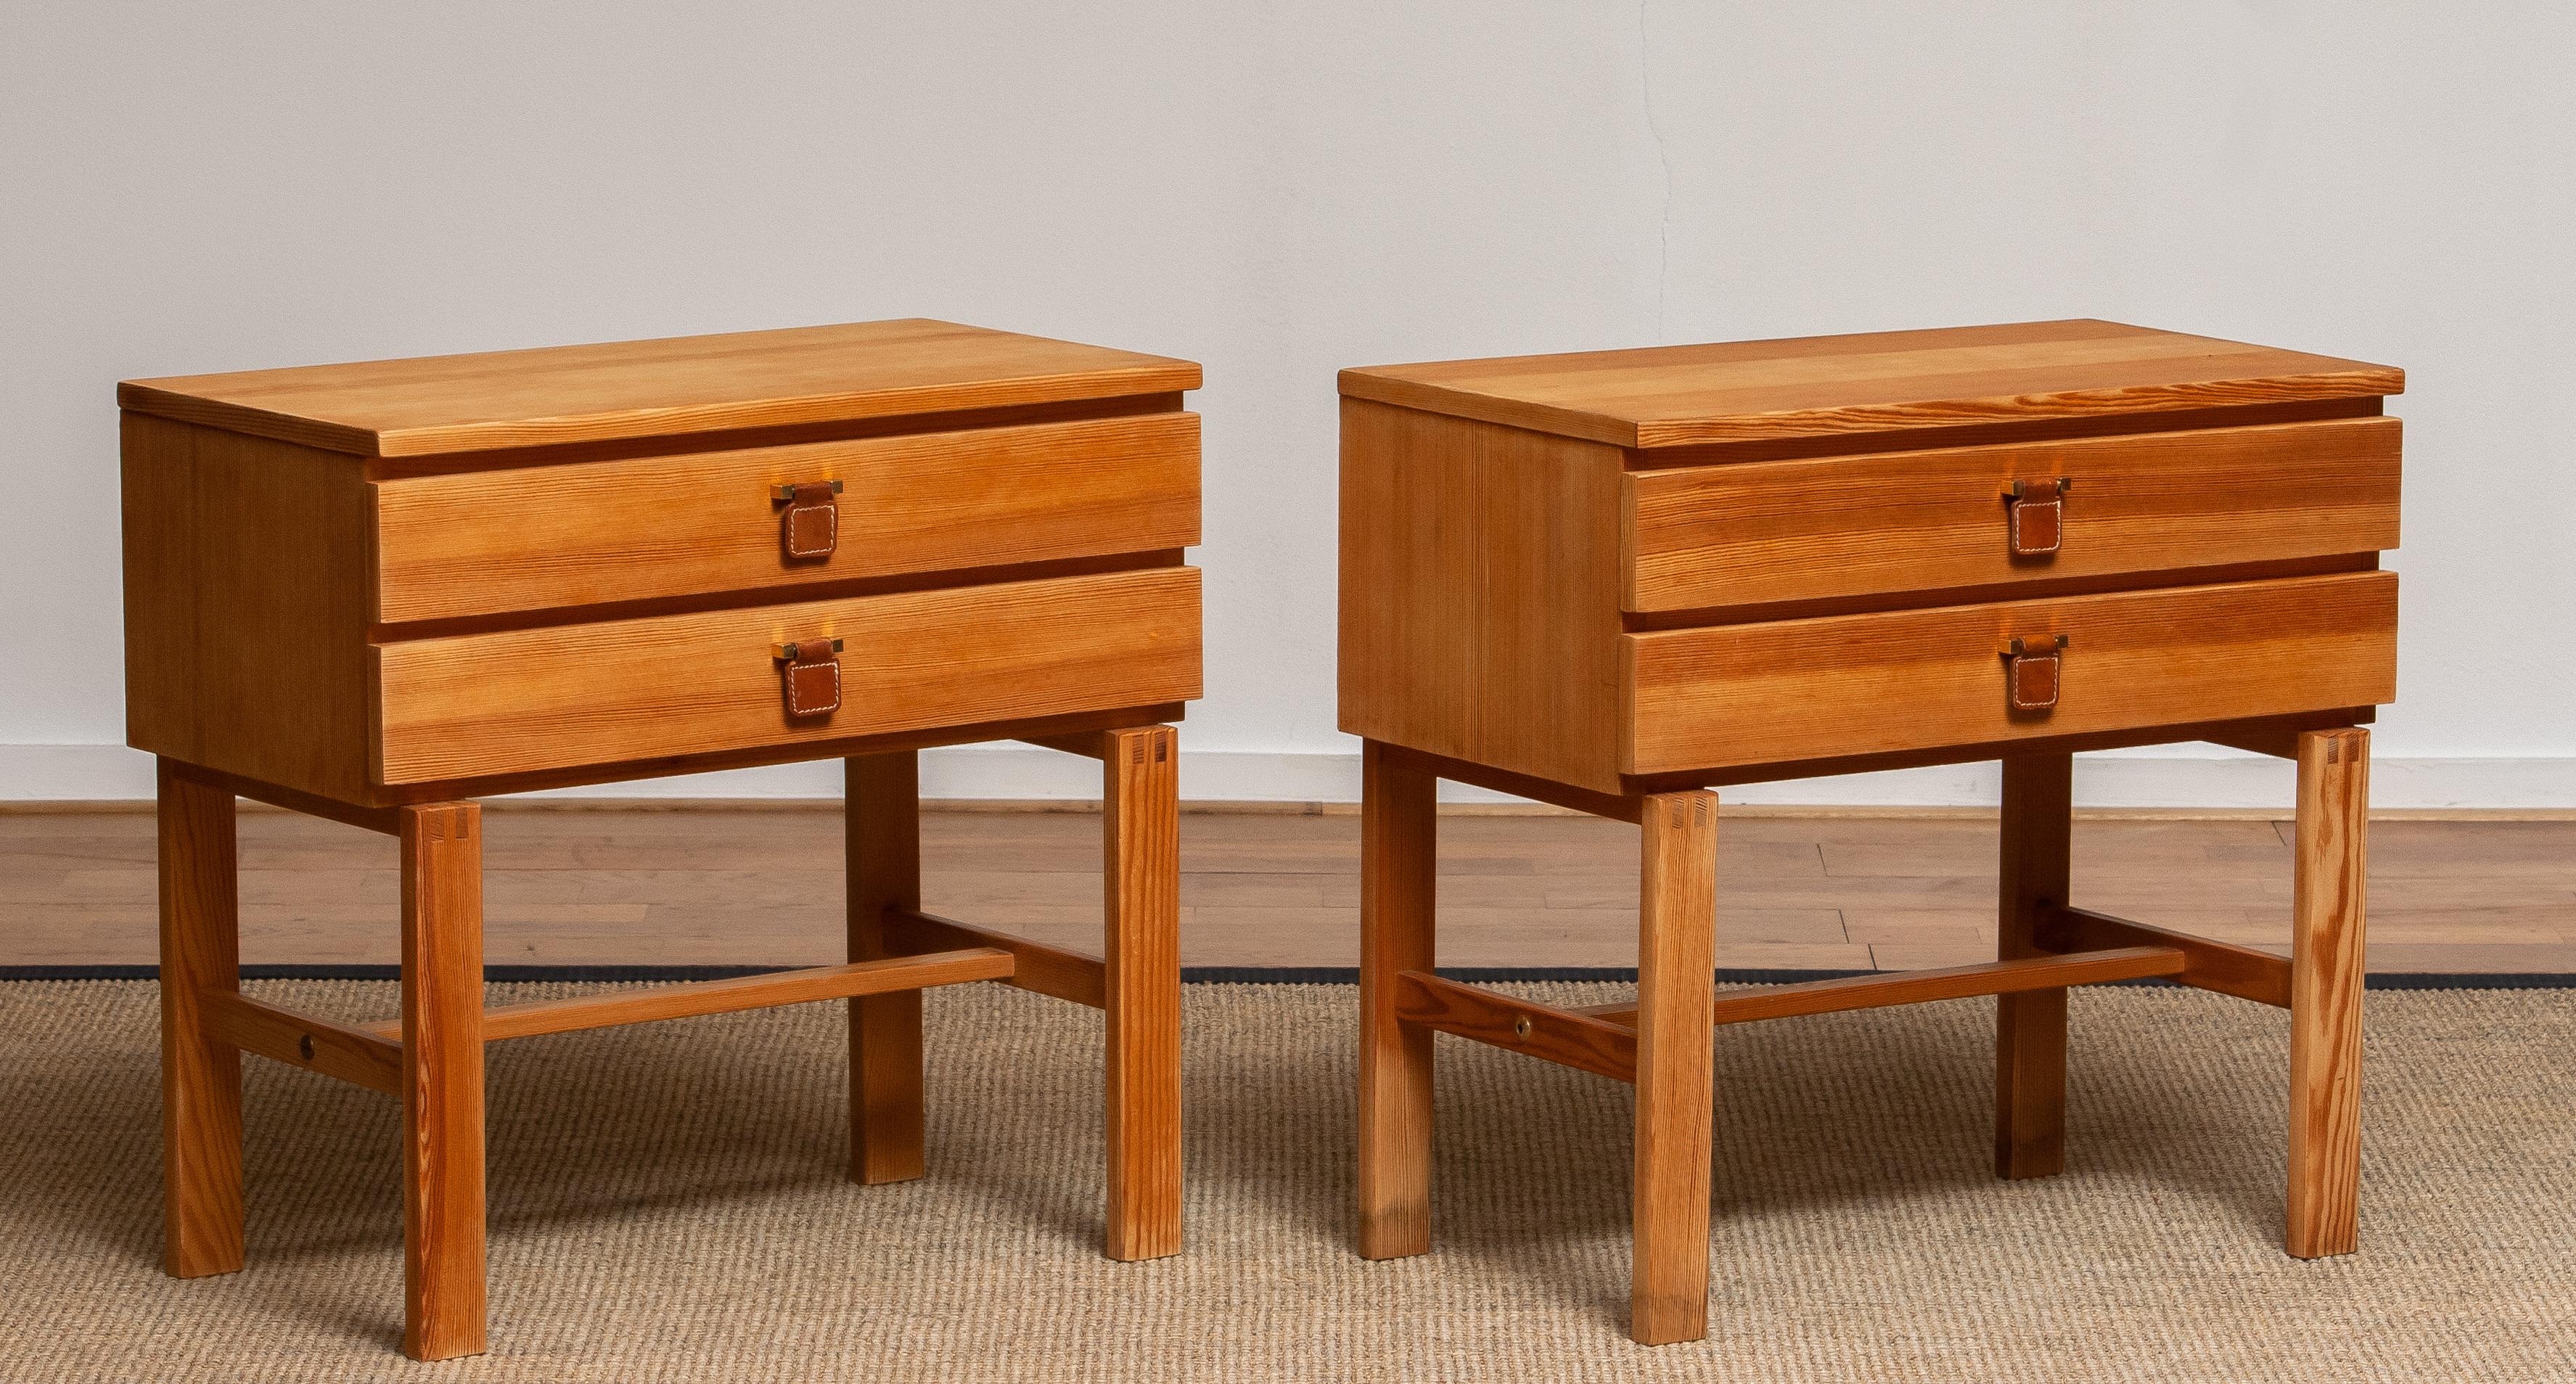 Brass 1970s, Pair of Nightstands or Bedside Tables in Pine by Sigurd Göransson Sweden